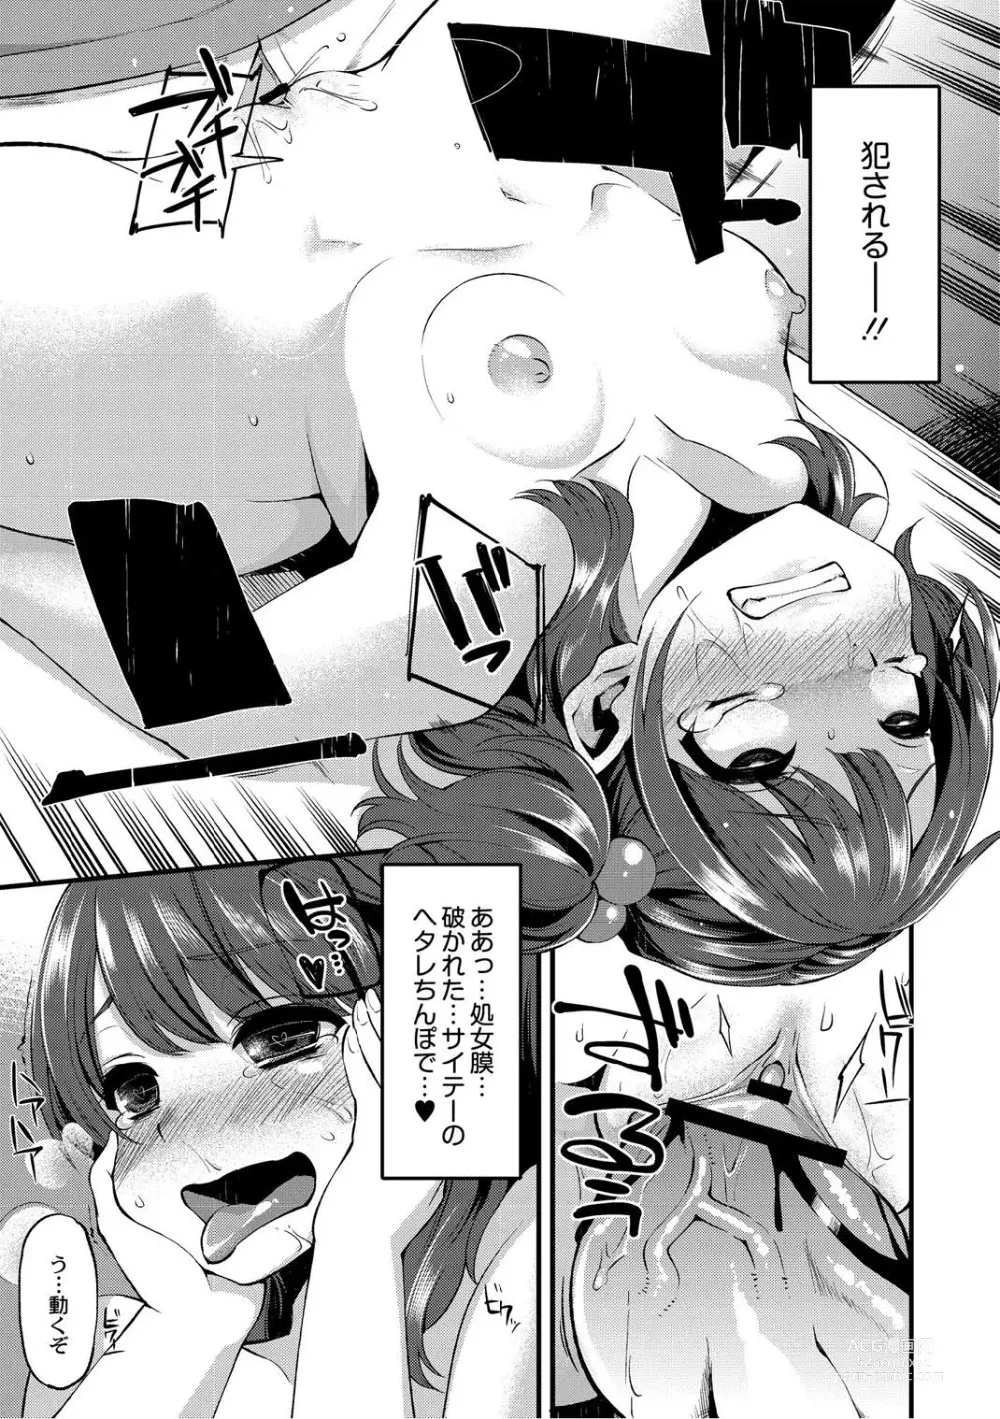 Page 182 of manga Monthly QooPA 2014-10